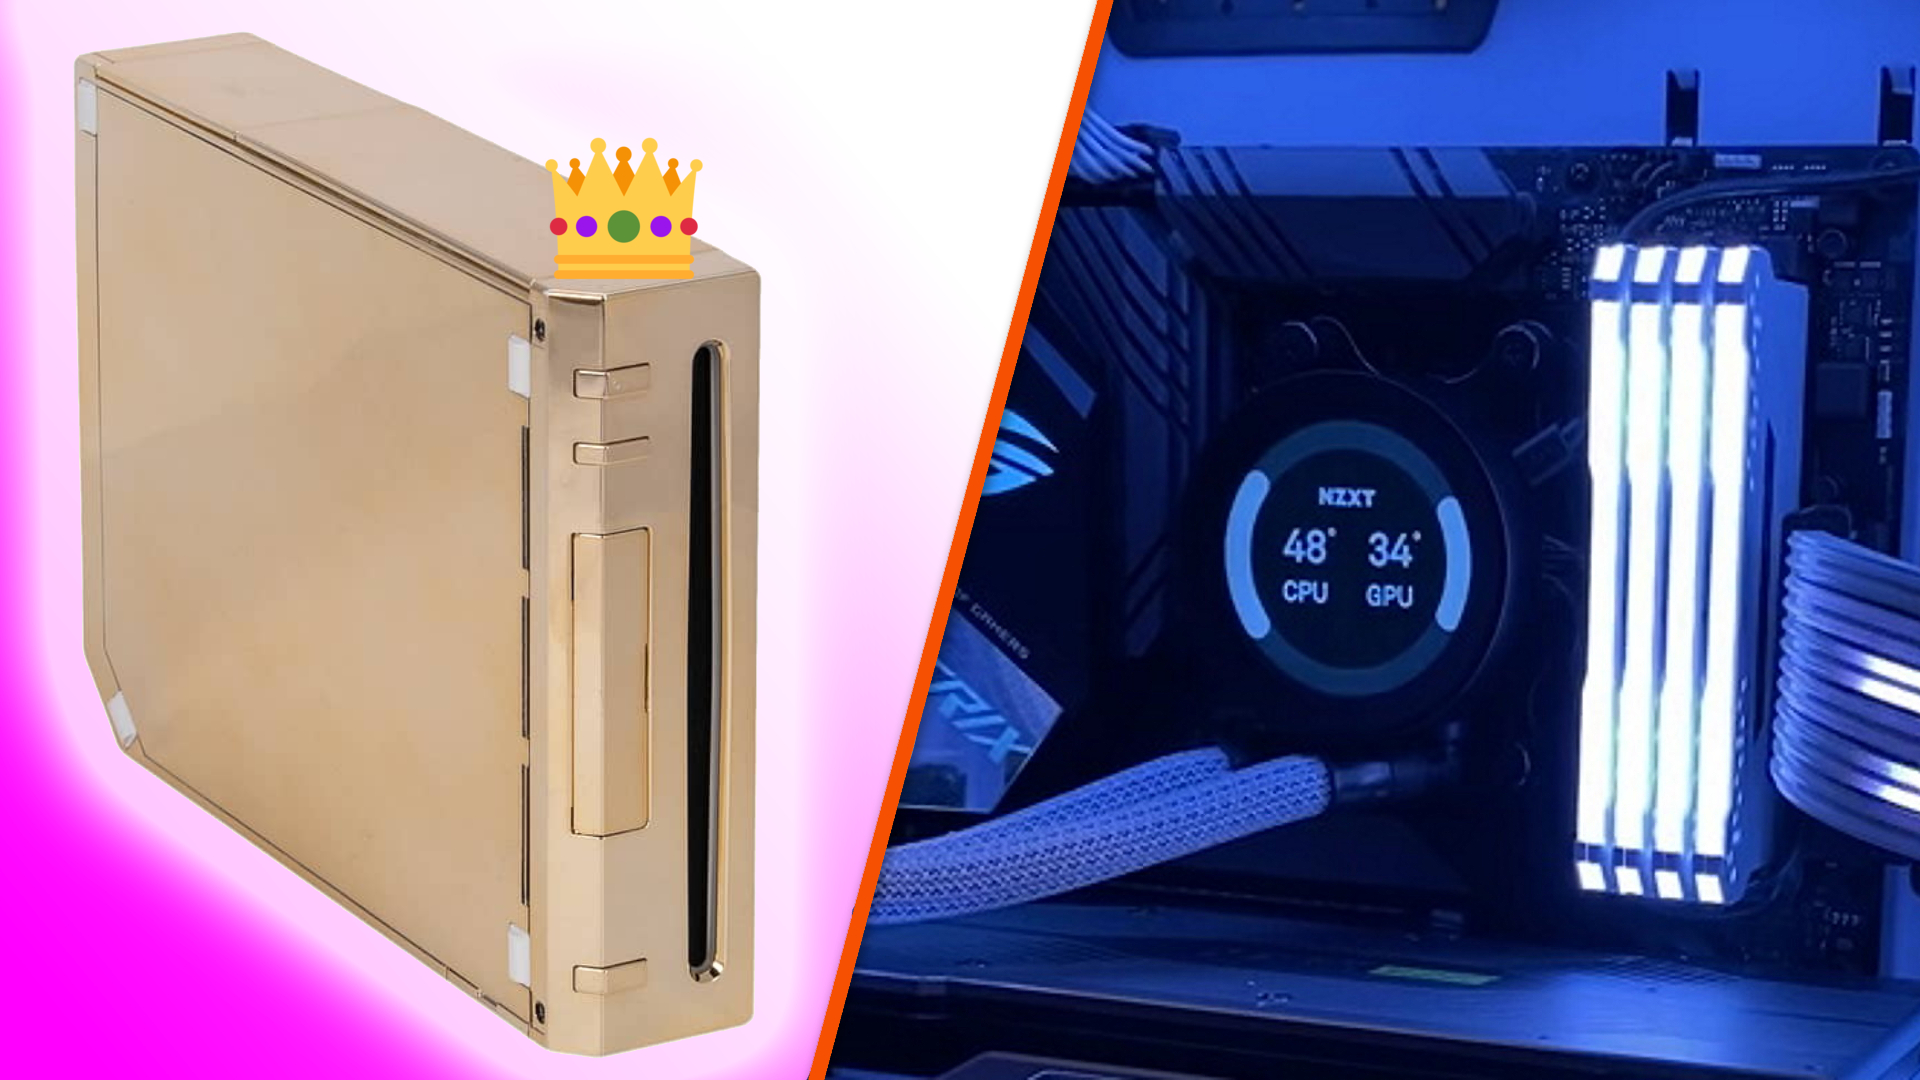 Someone should mod the golden Nintendo Wii into a gaming PC